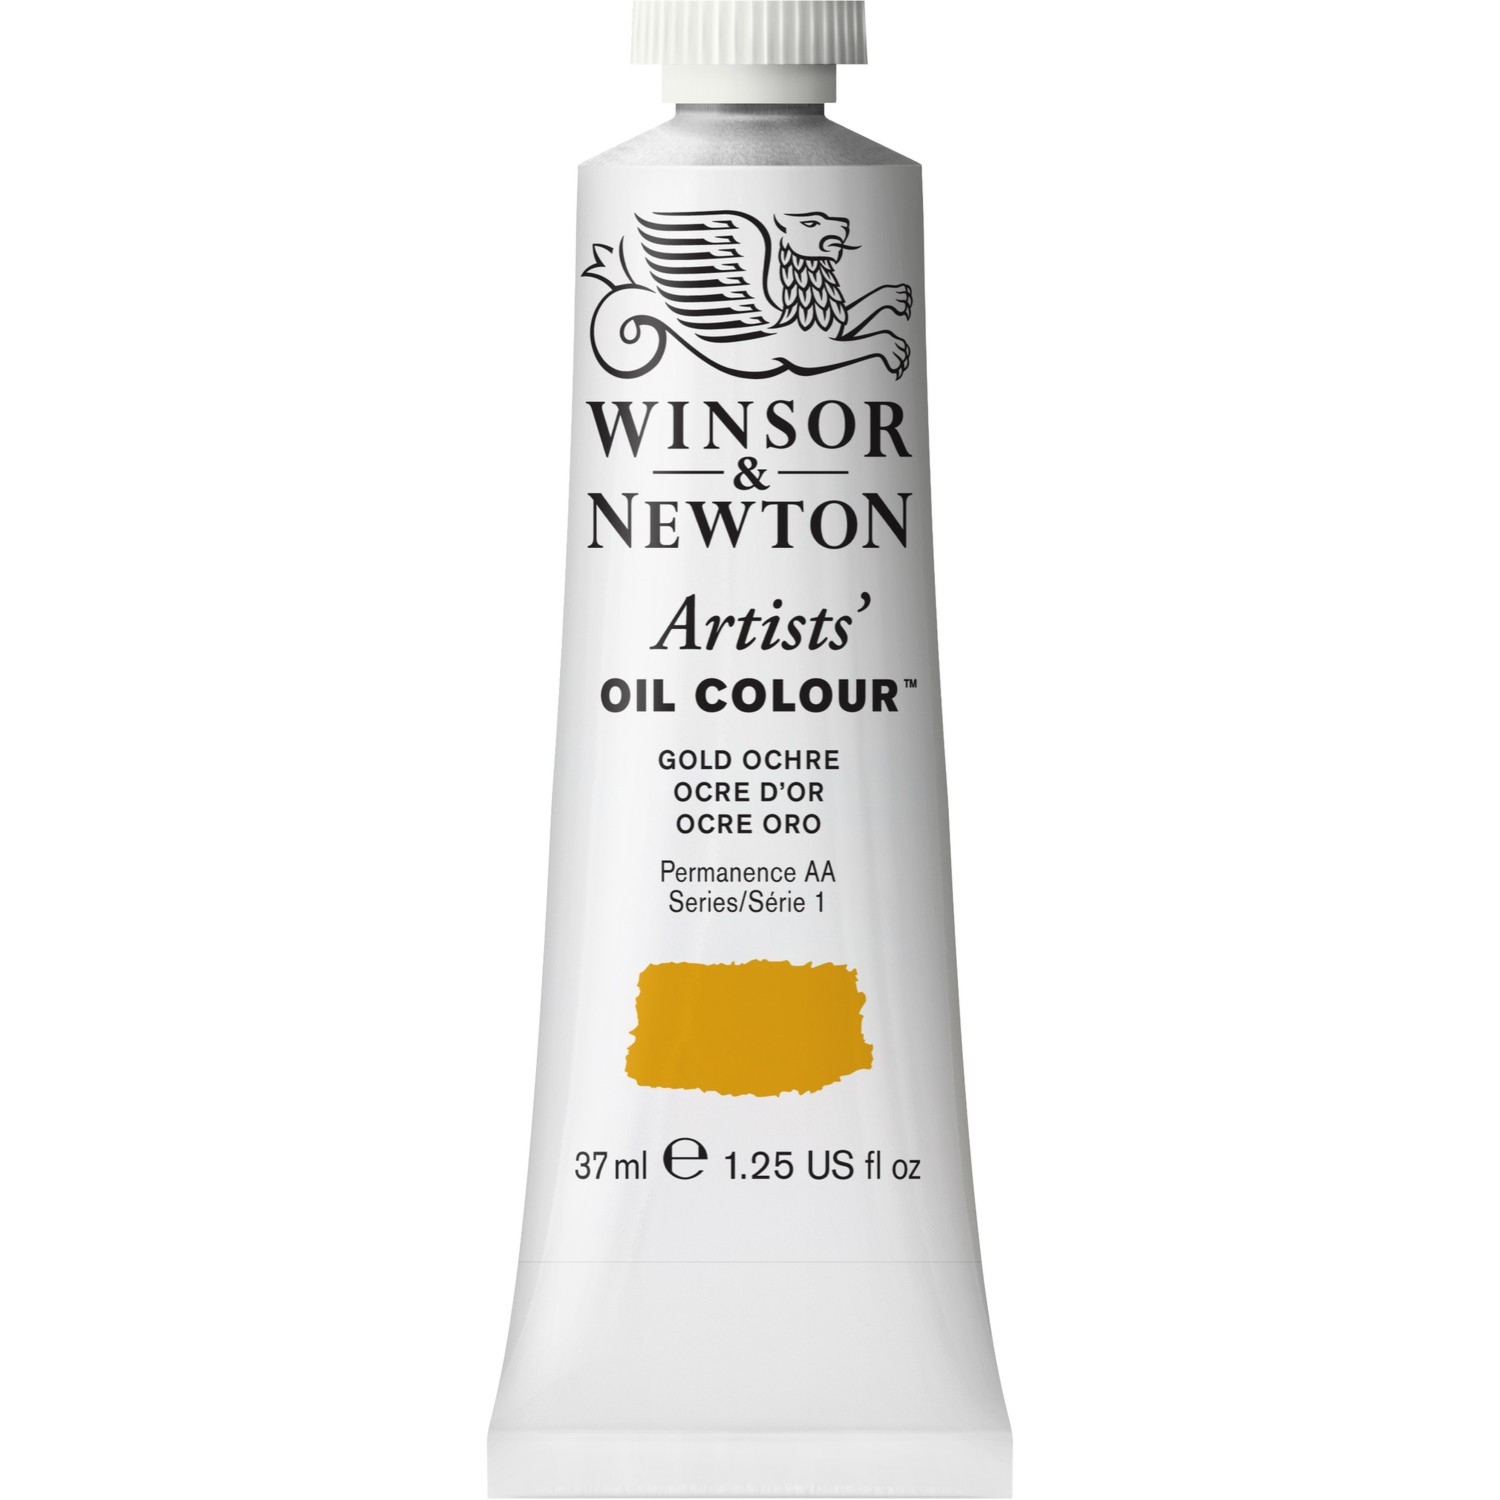 Winsor and Newton 37ml Artists' Oil Colours - Gold Ochre Image 1